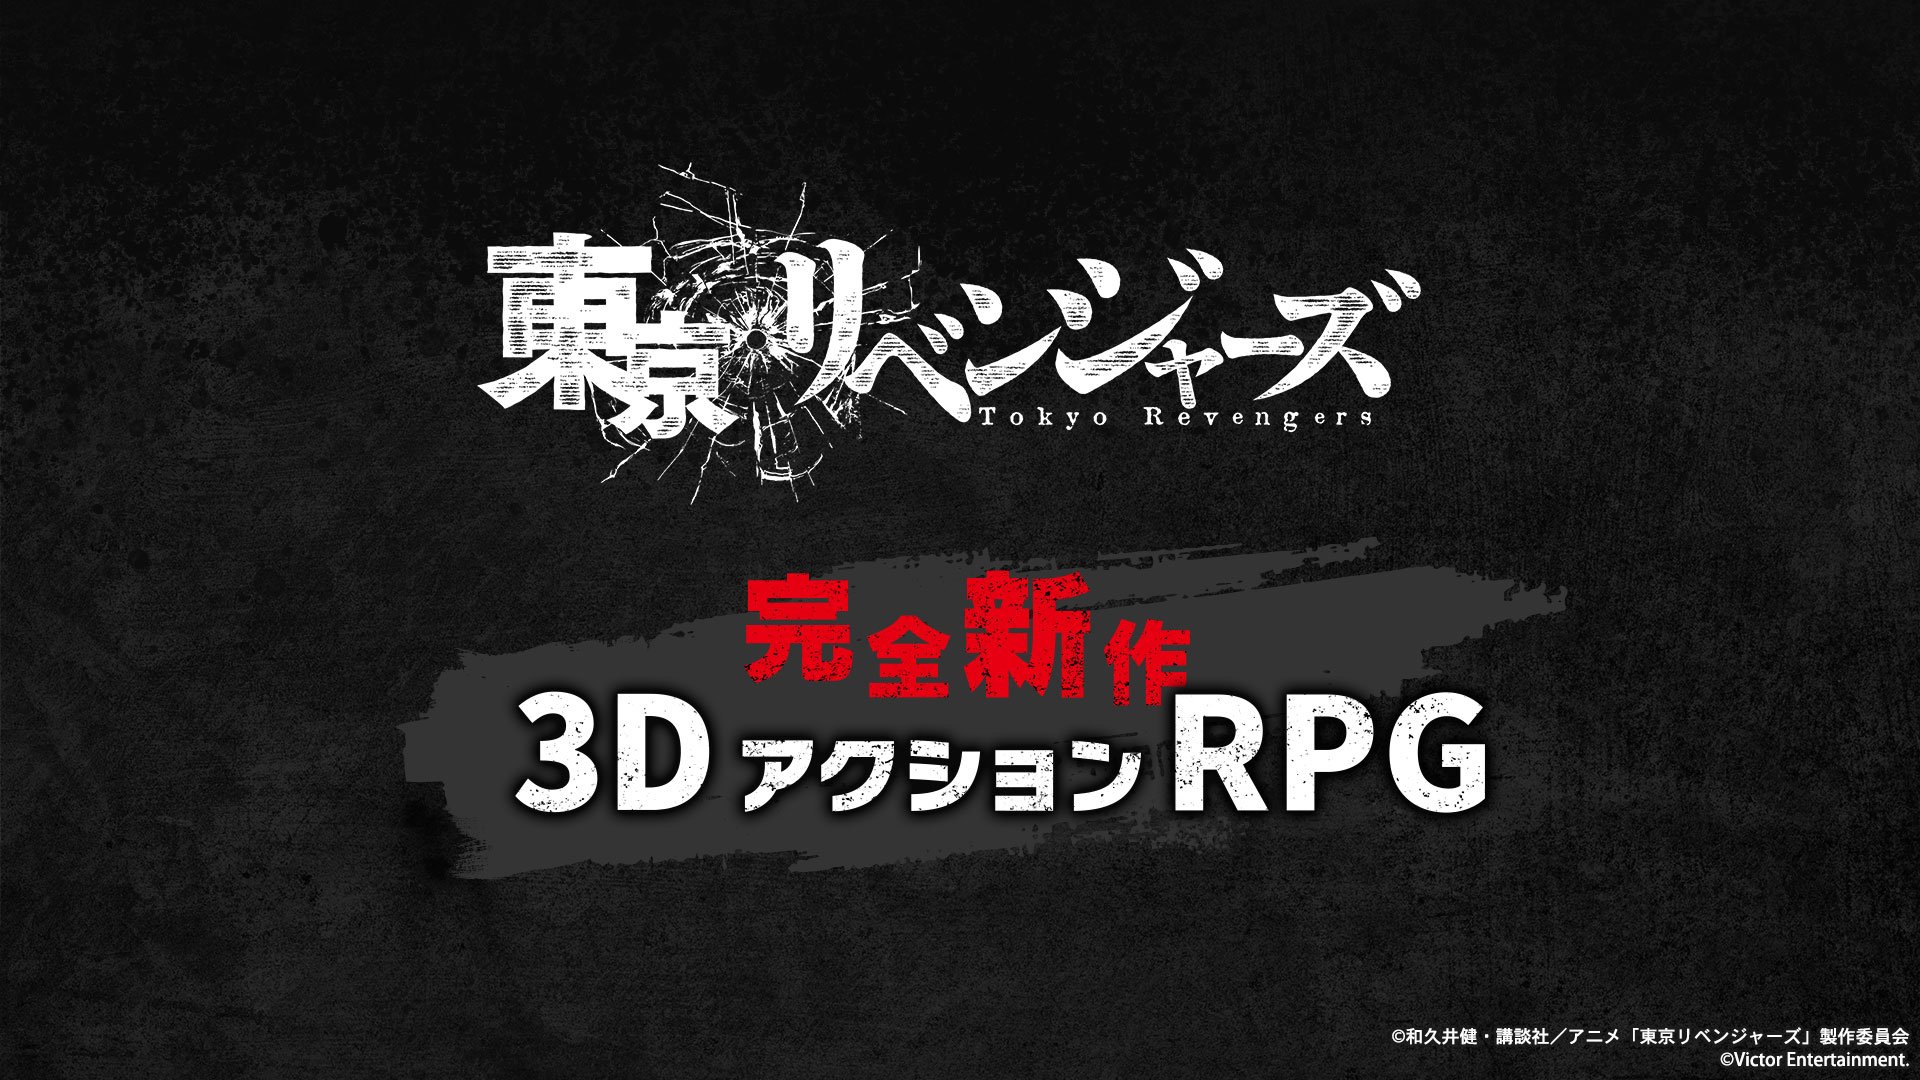 Tokyo Revengers 3D action RPG announced for PS5, PS4, Switch, PC, iOS, and  Android - Gematsu